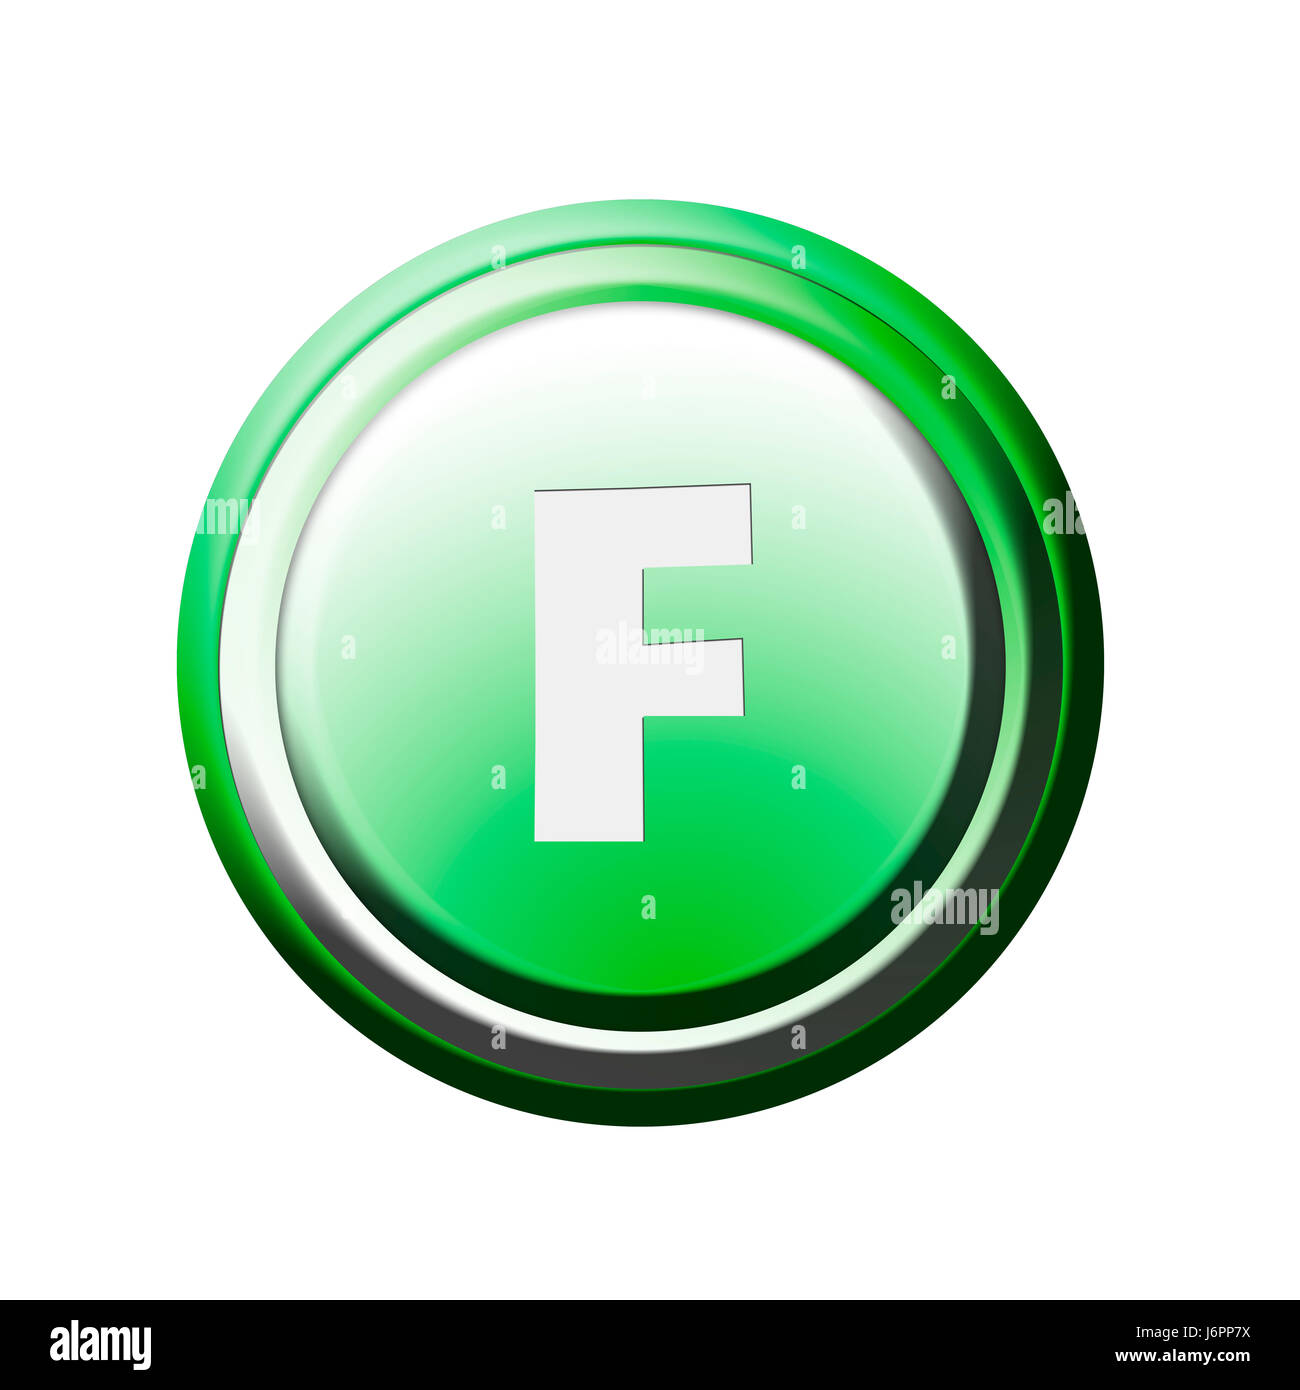 button with letter f Stock Photo